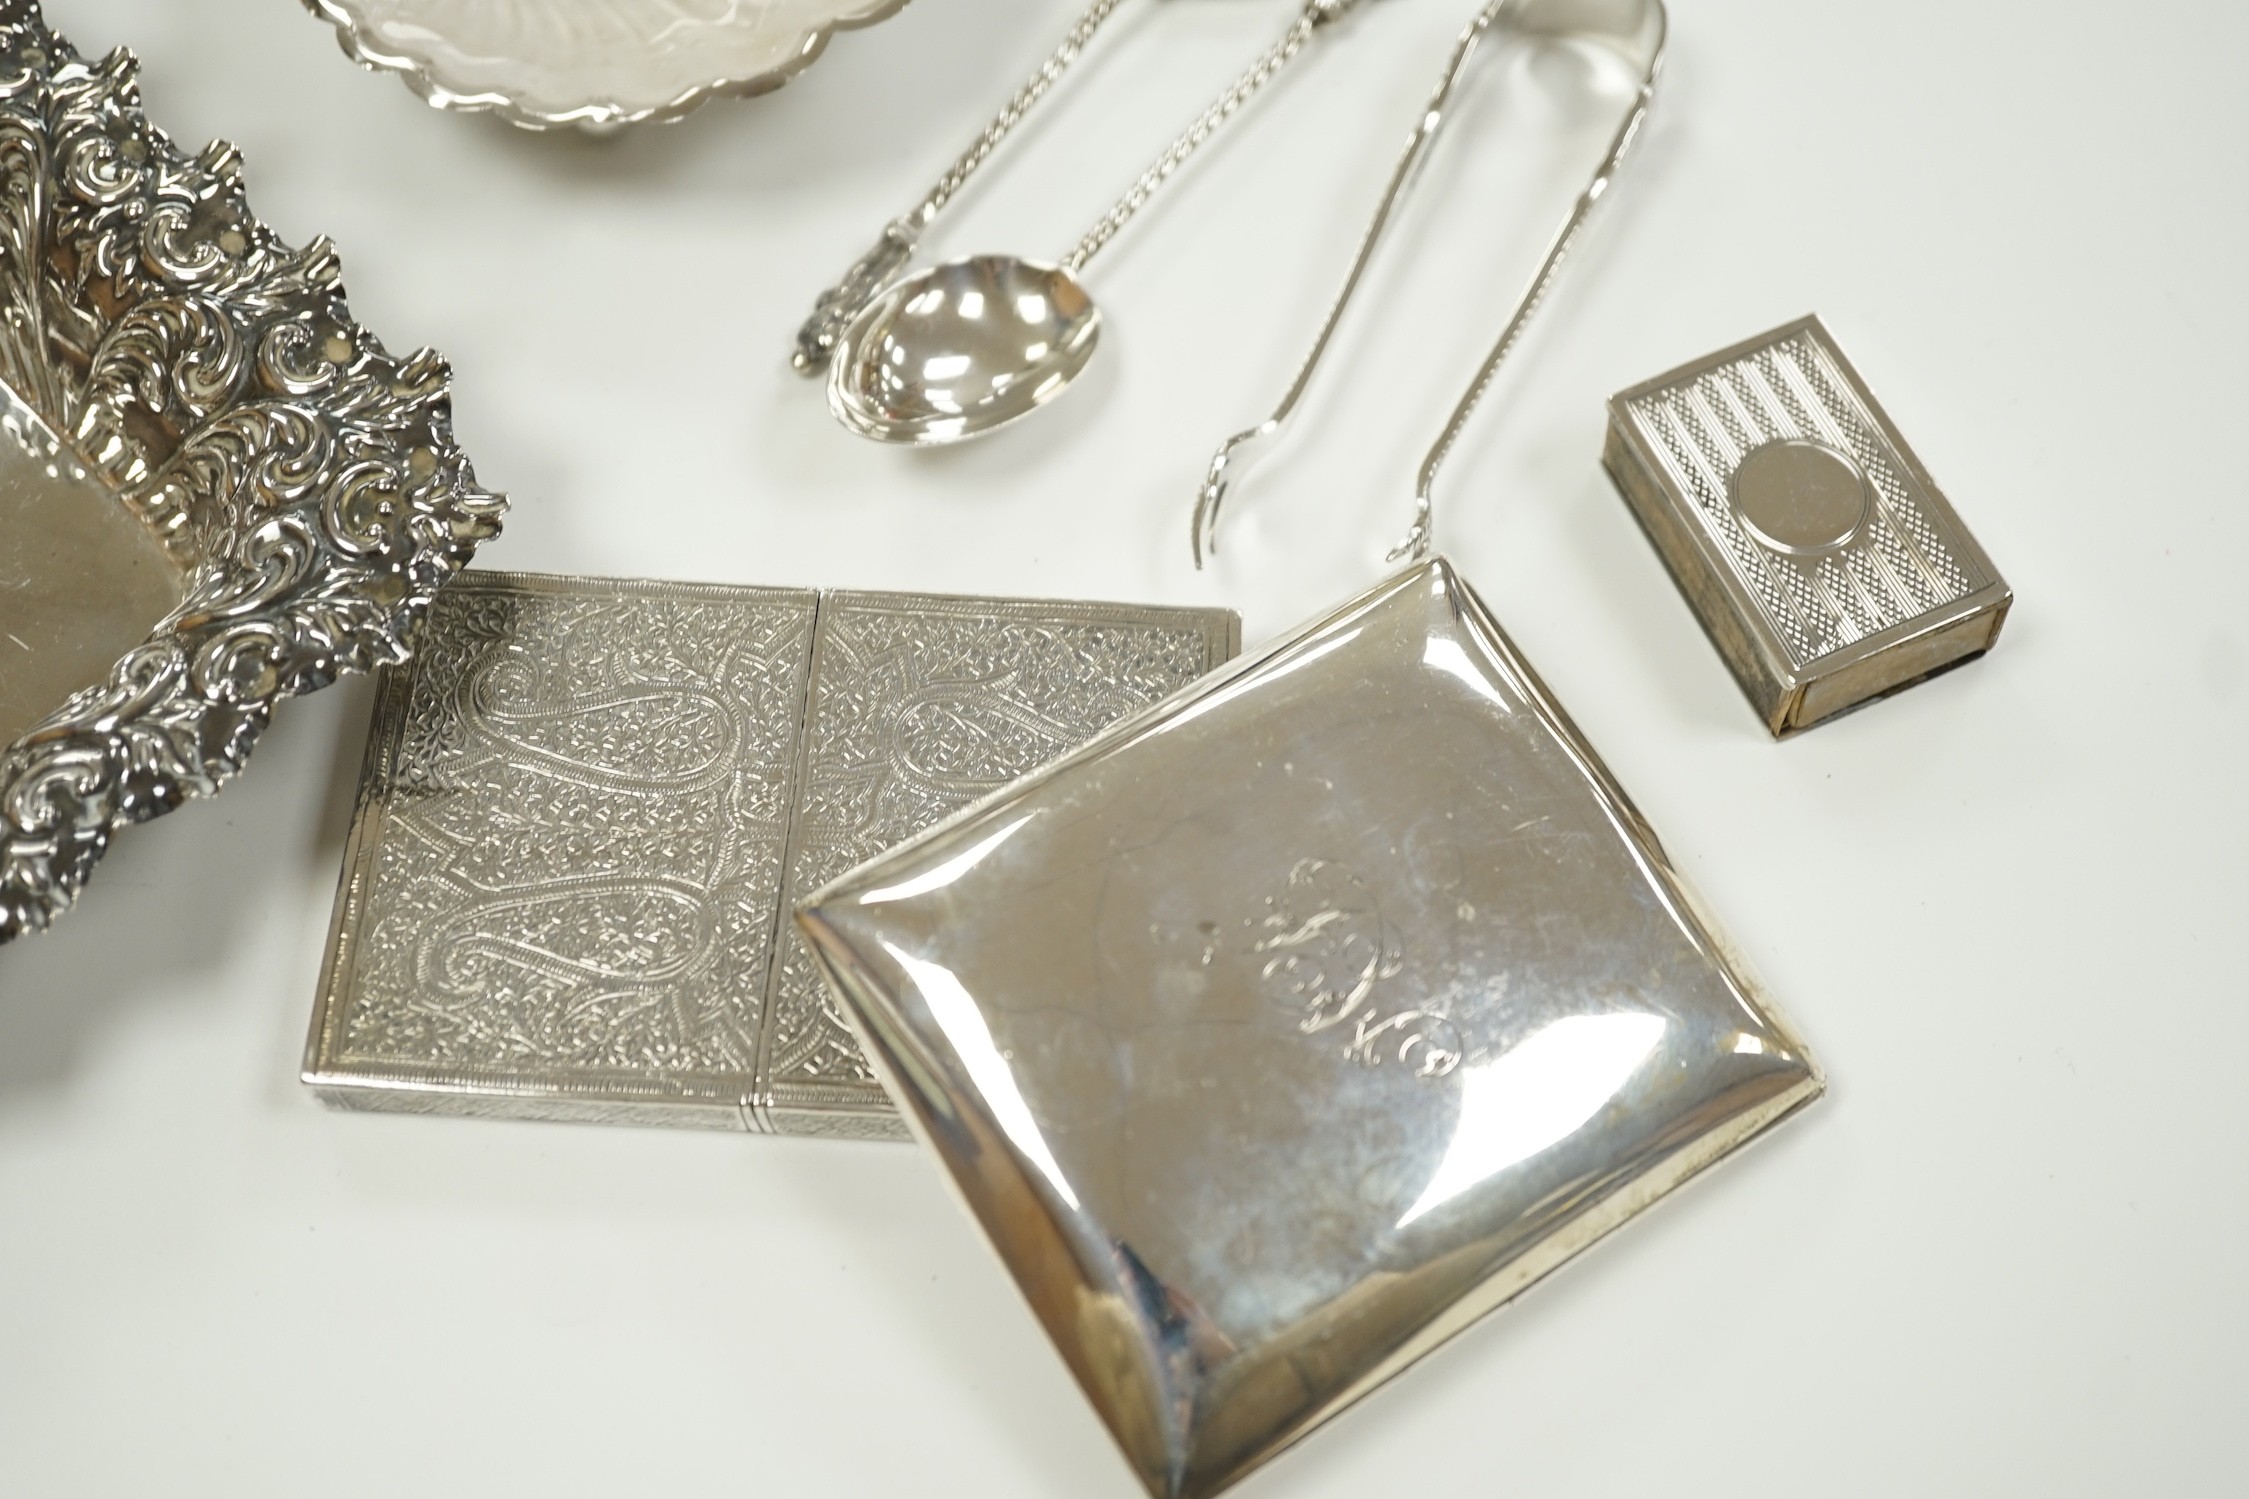 A small group of collectable silver including a repousse bonbon dish, 13.5cm, cigarette case, silver cream jug and sugar bowl, butter shell, vesta case, match sleeve, two apostle teaspoons and a George III curved silver